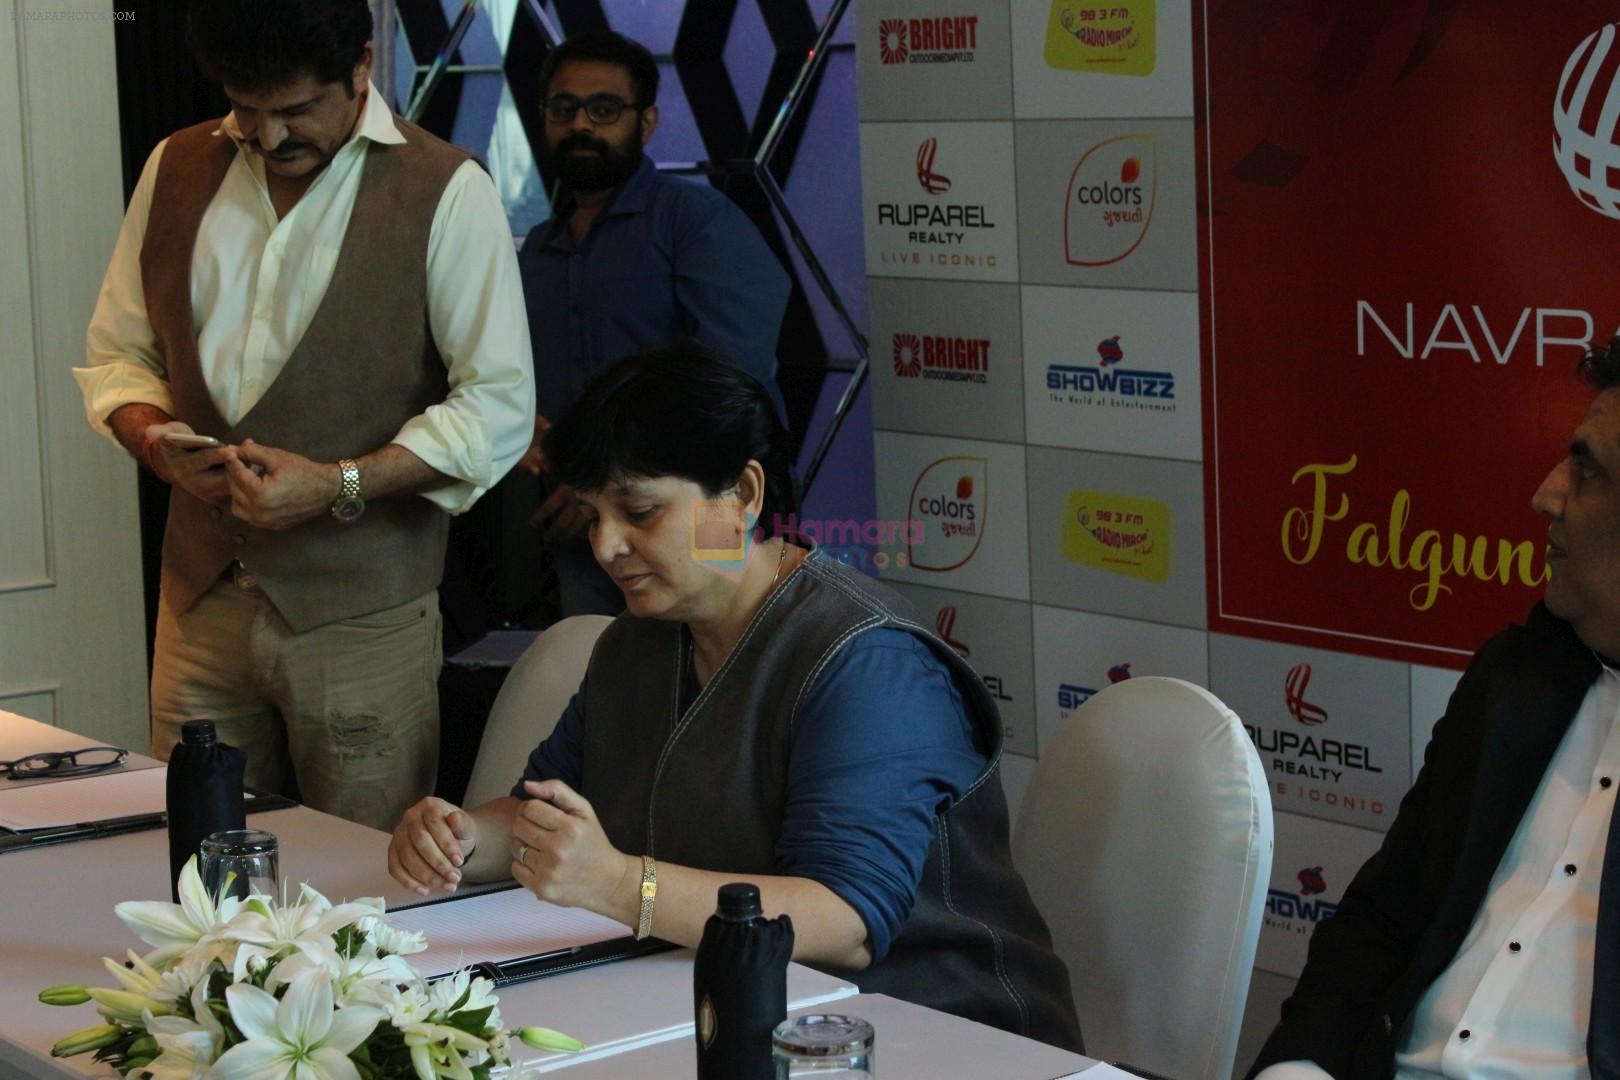 Falguni Pathak, Rajesh Khattar at the press conference To Announce Ruprel Reality Association on 22nd Aug 2017